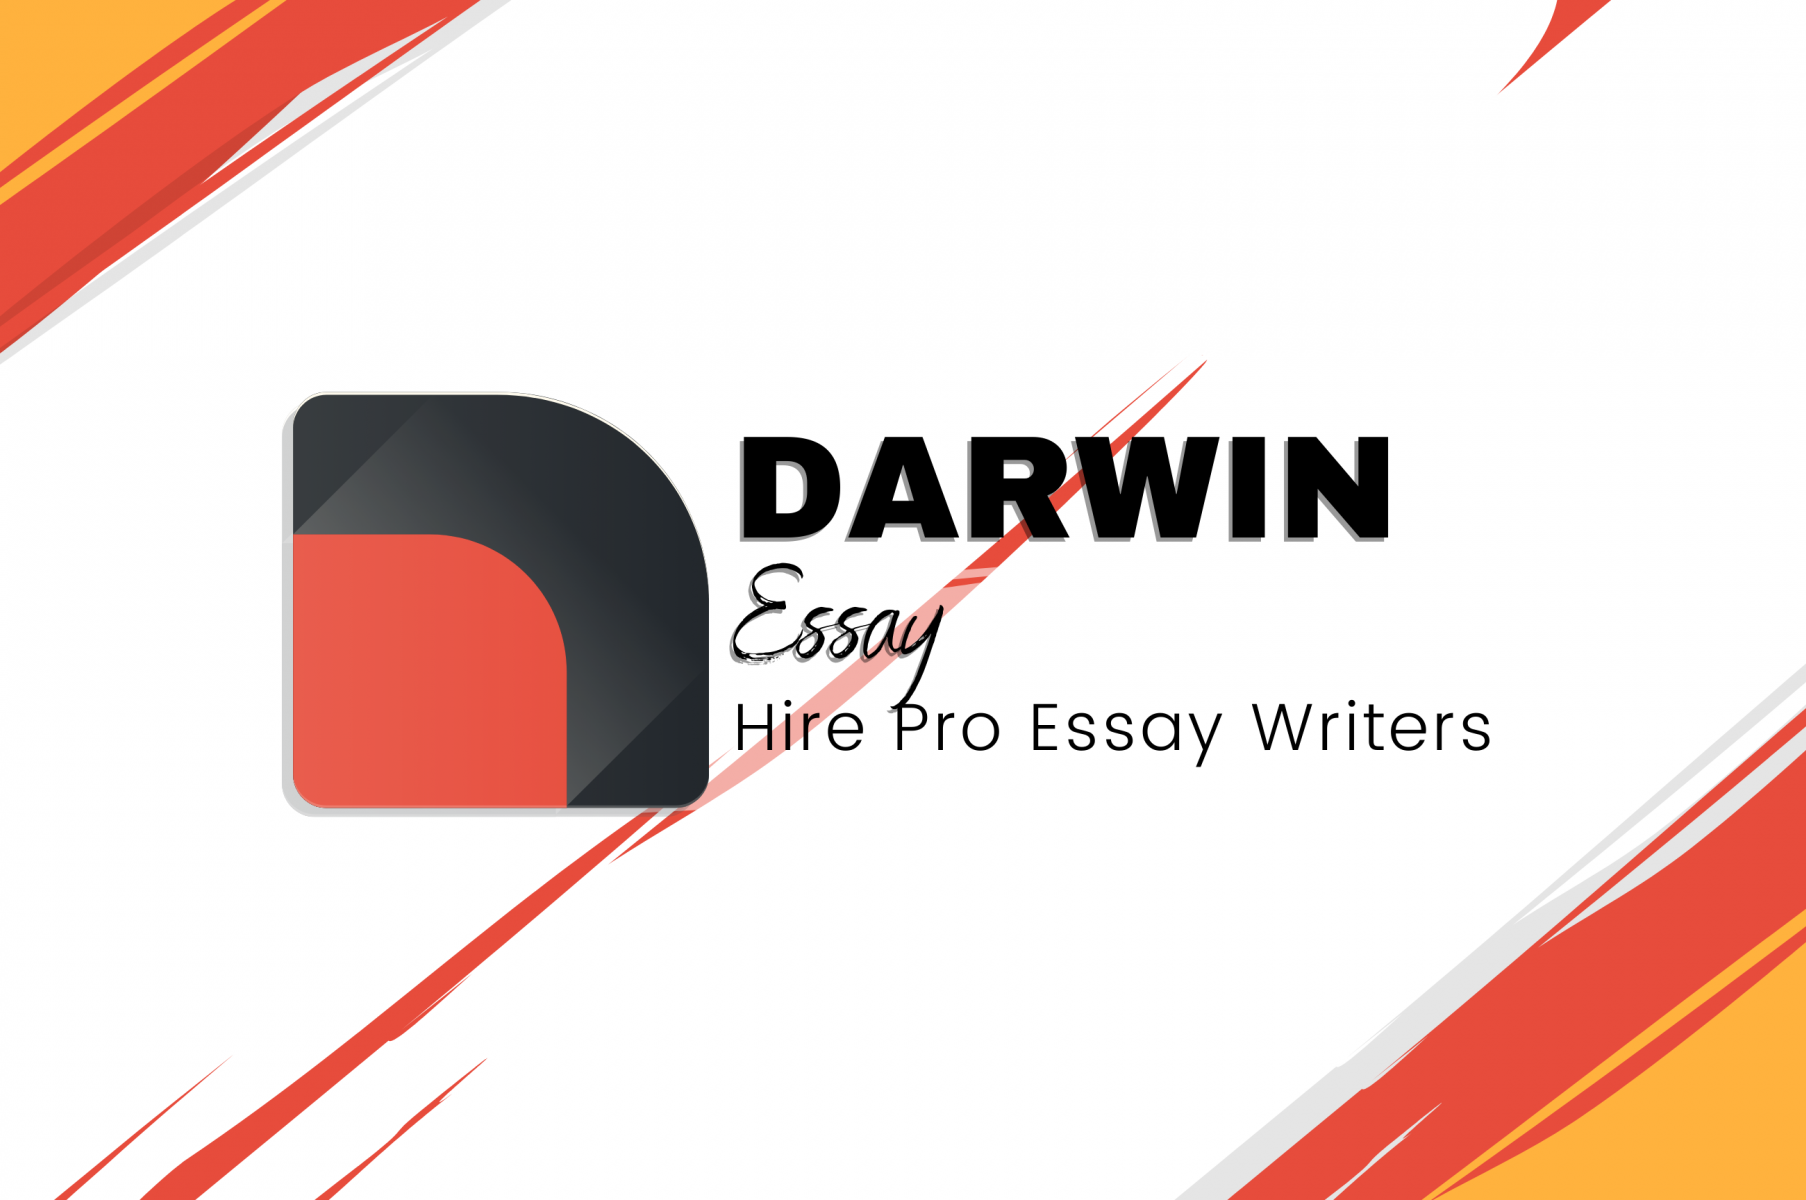 in article about finding an essay writer, darwin essay banner